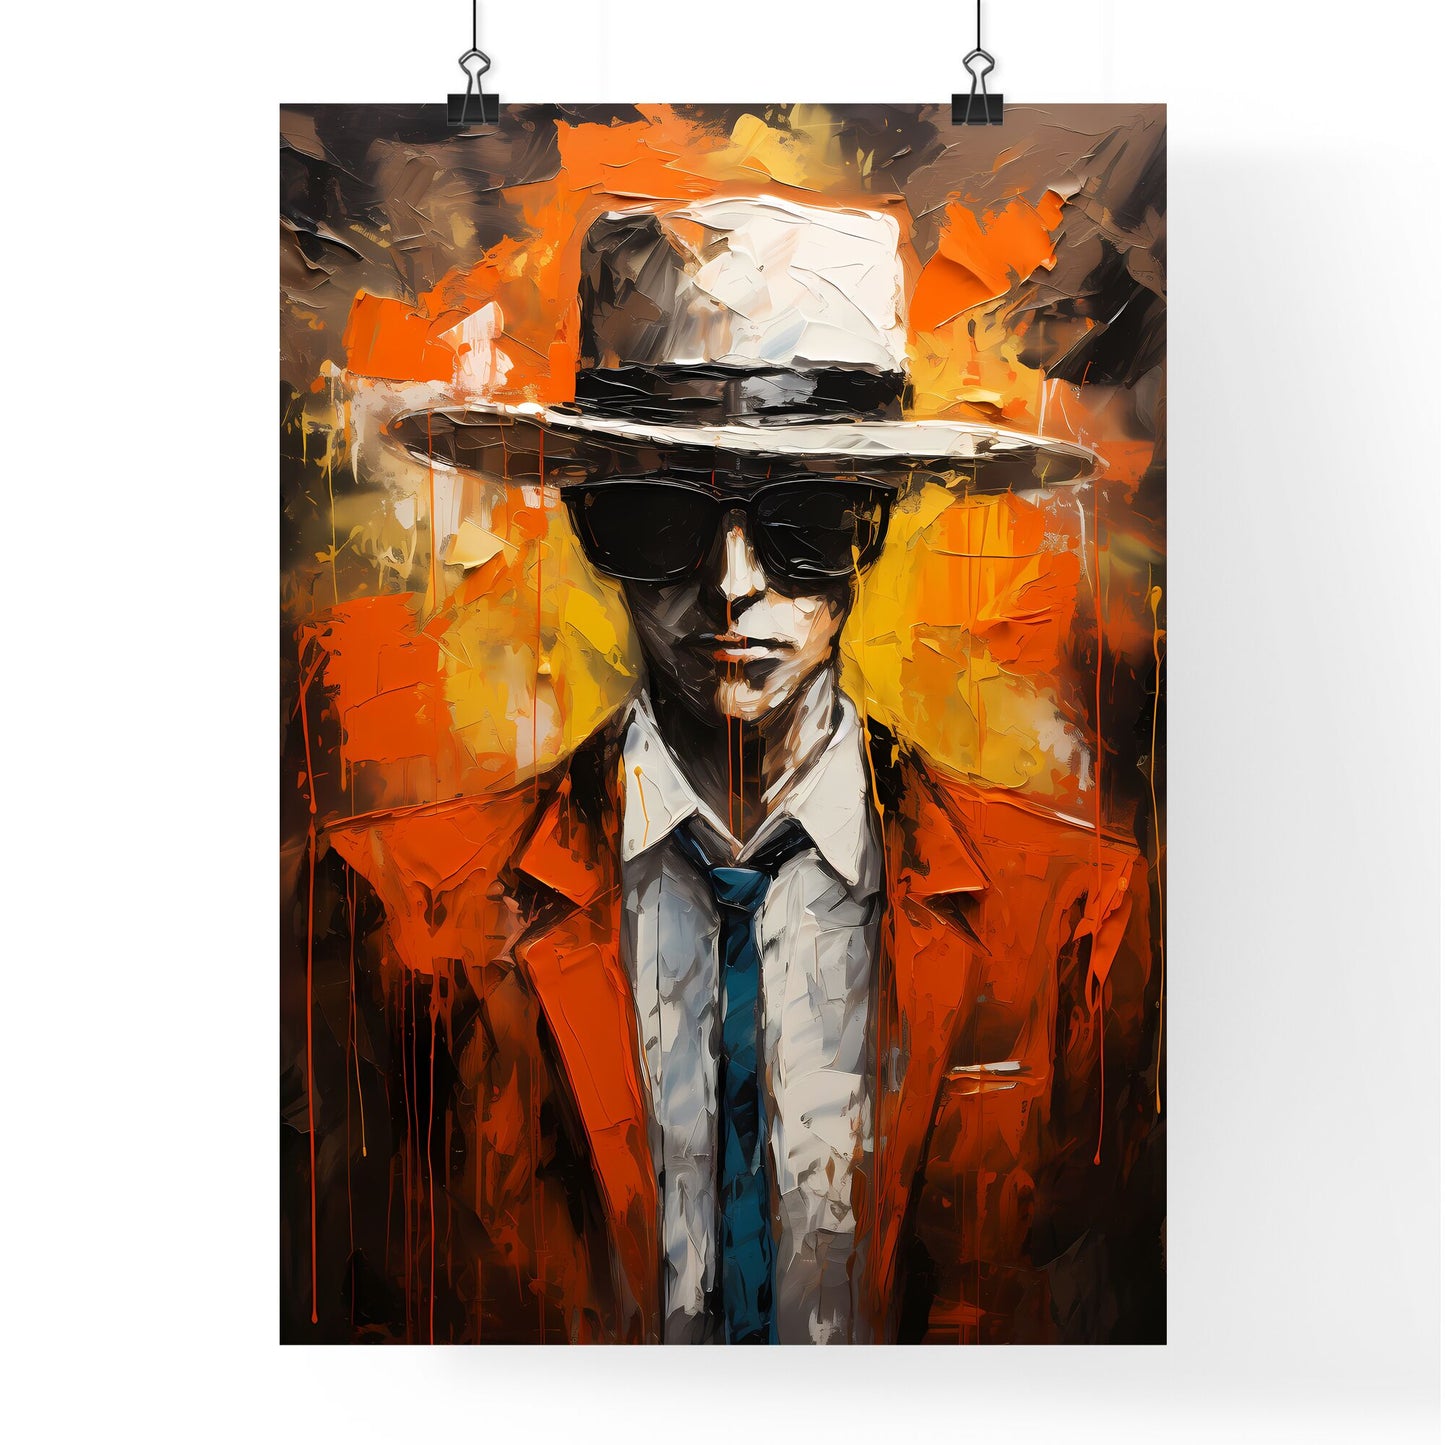 The Invisible Man - A Painting Of A Man Wearing A Hat And Sunglasses Default Title